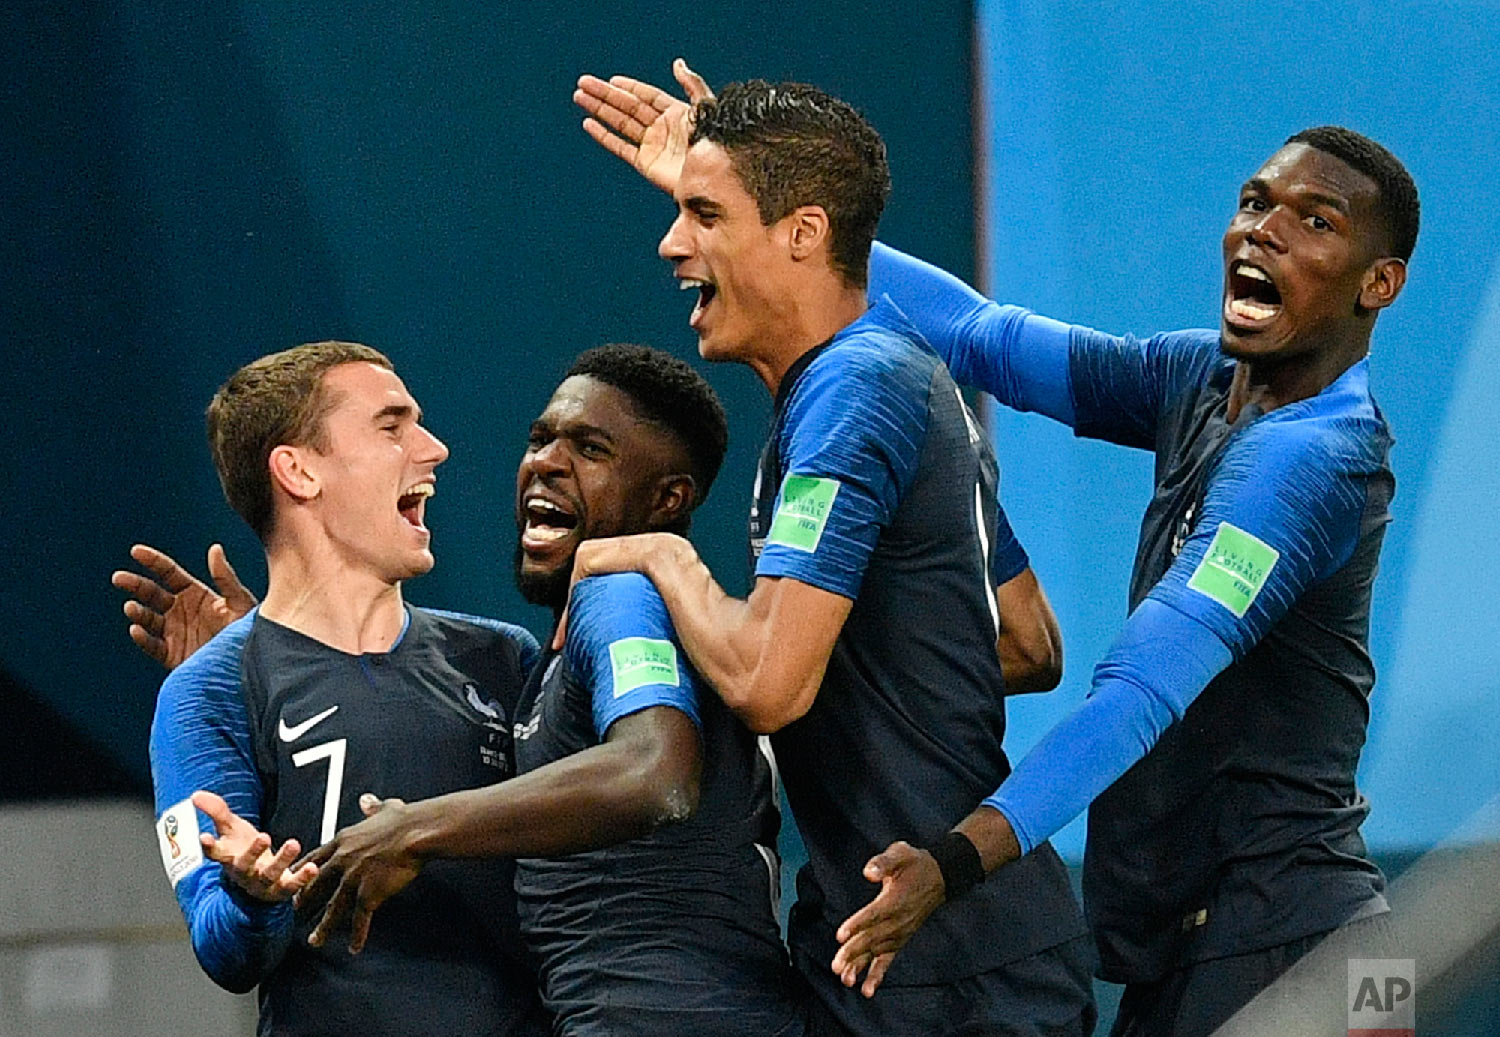  France's Samuel Umtiti, second from left, is congratulated by his teammates France's Antoine Griezmann, Raphael Varane and Paul Pogba, from left, after scoring the opening goal during the semifinal match between France and Belgium at the 2018 soccer